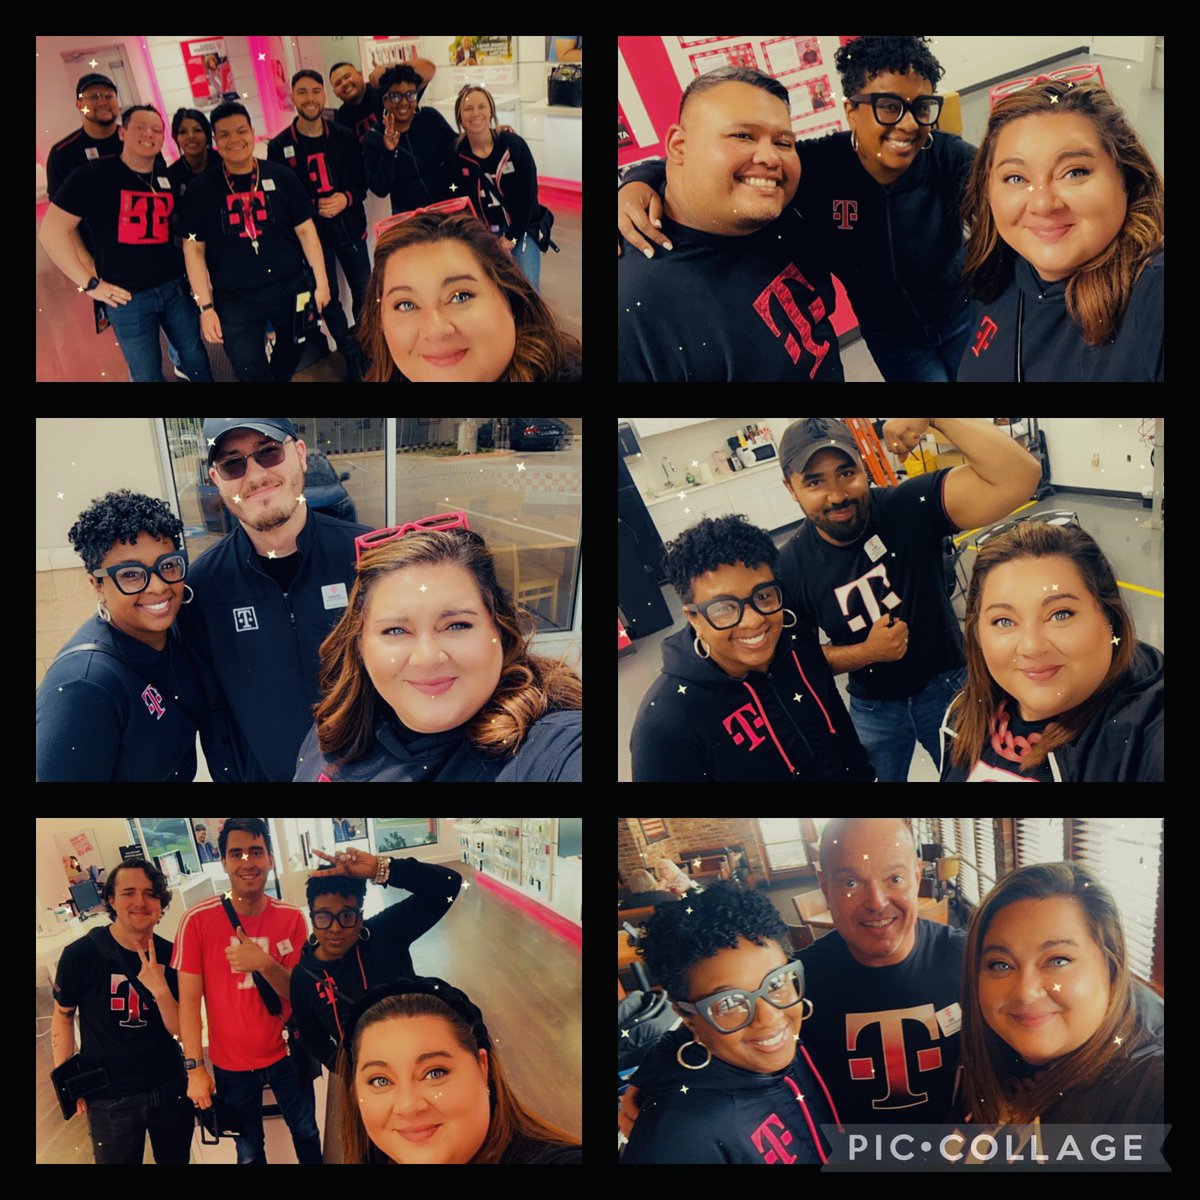 Thank you @angieporterwill for coming to Tulsa to spend time with me & the Team! First official Market Director visit as a Sr Manager was a success!! 🙌🏽🎉#TLR #Heartland #T100 #OneTeamTogether #TTown @domjrcoleman @TMobile